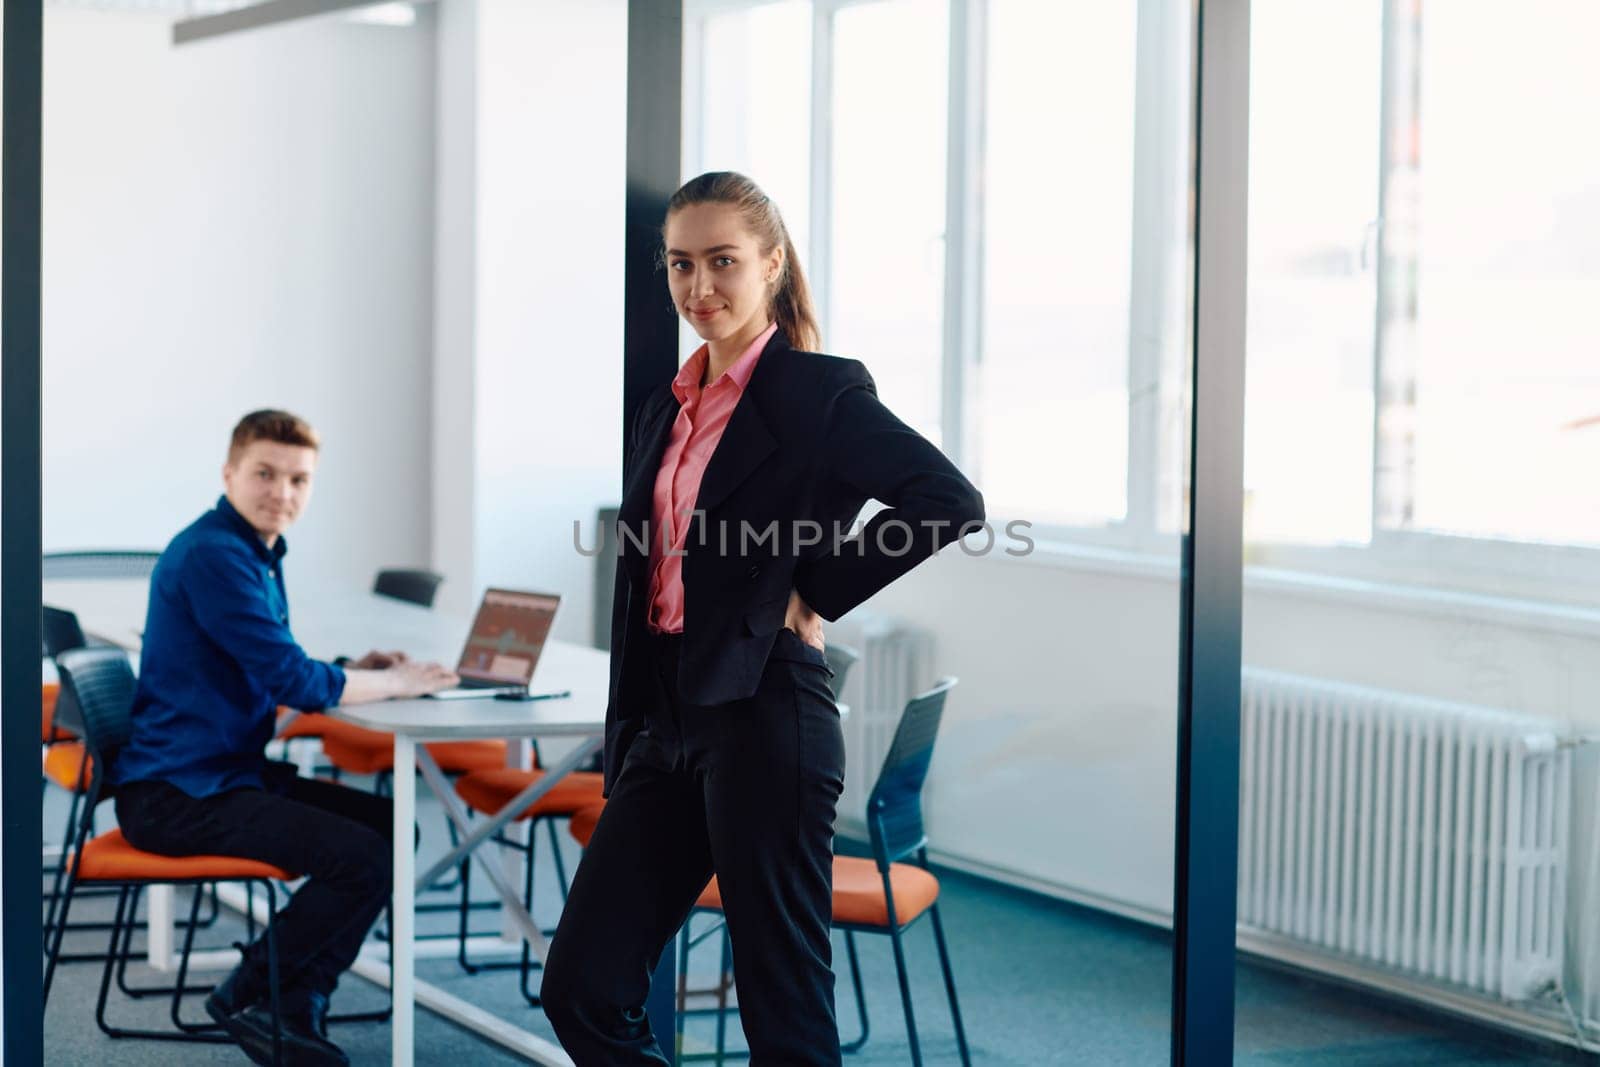 The director of an IT company poses with her colleague in a modern startup office setting.